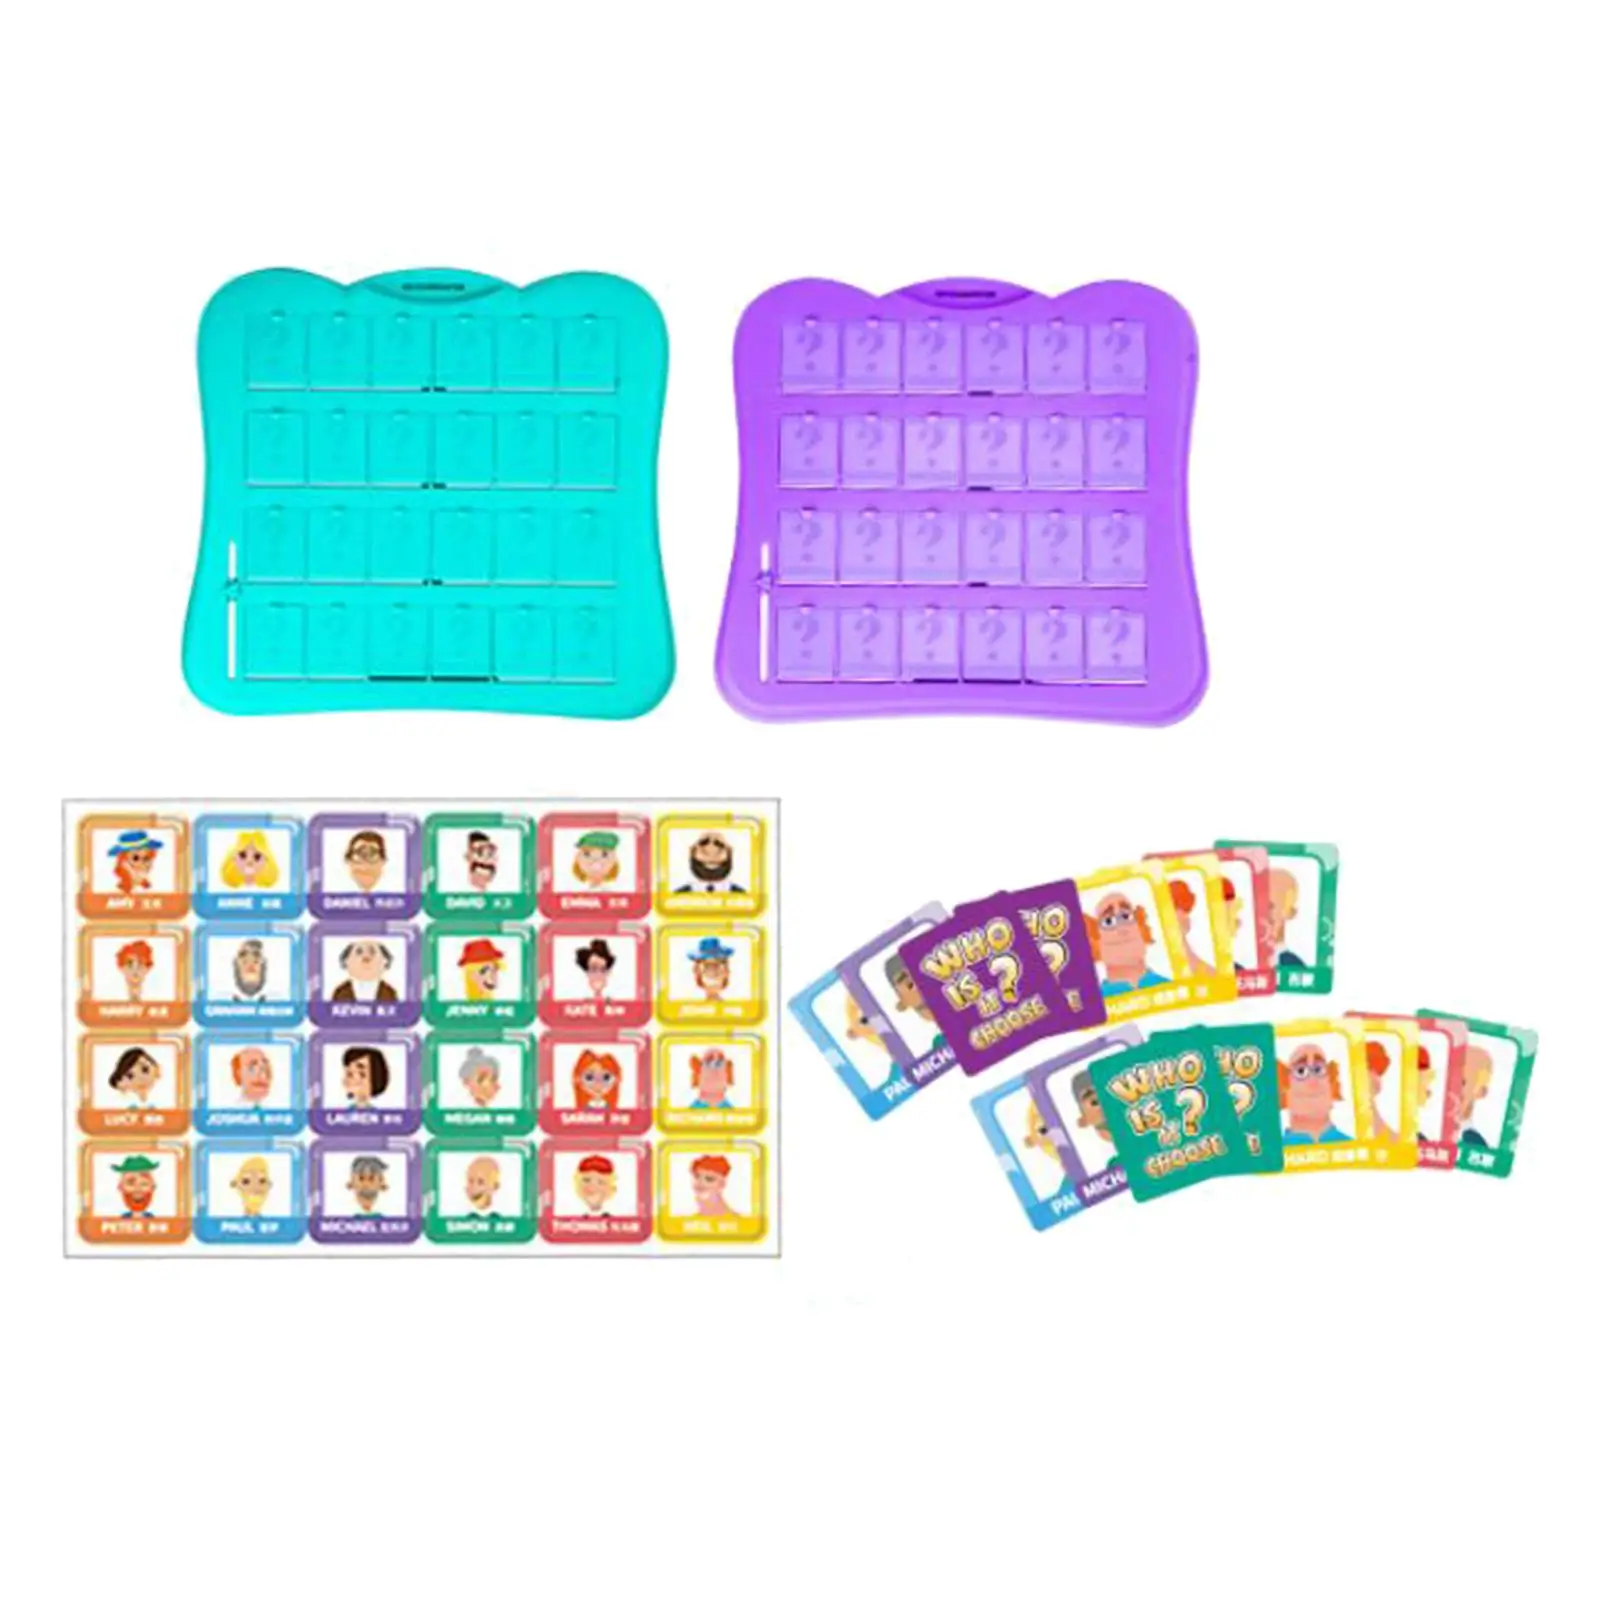 Guessing Who Game Valentines Day Gifts for Kids Classic Fun Reasoning Game for Travel Games Children Boys Party Prop Family Game